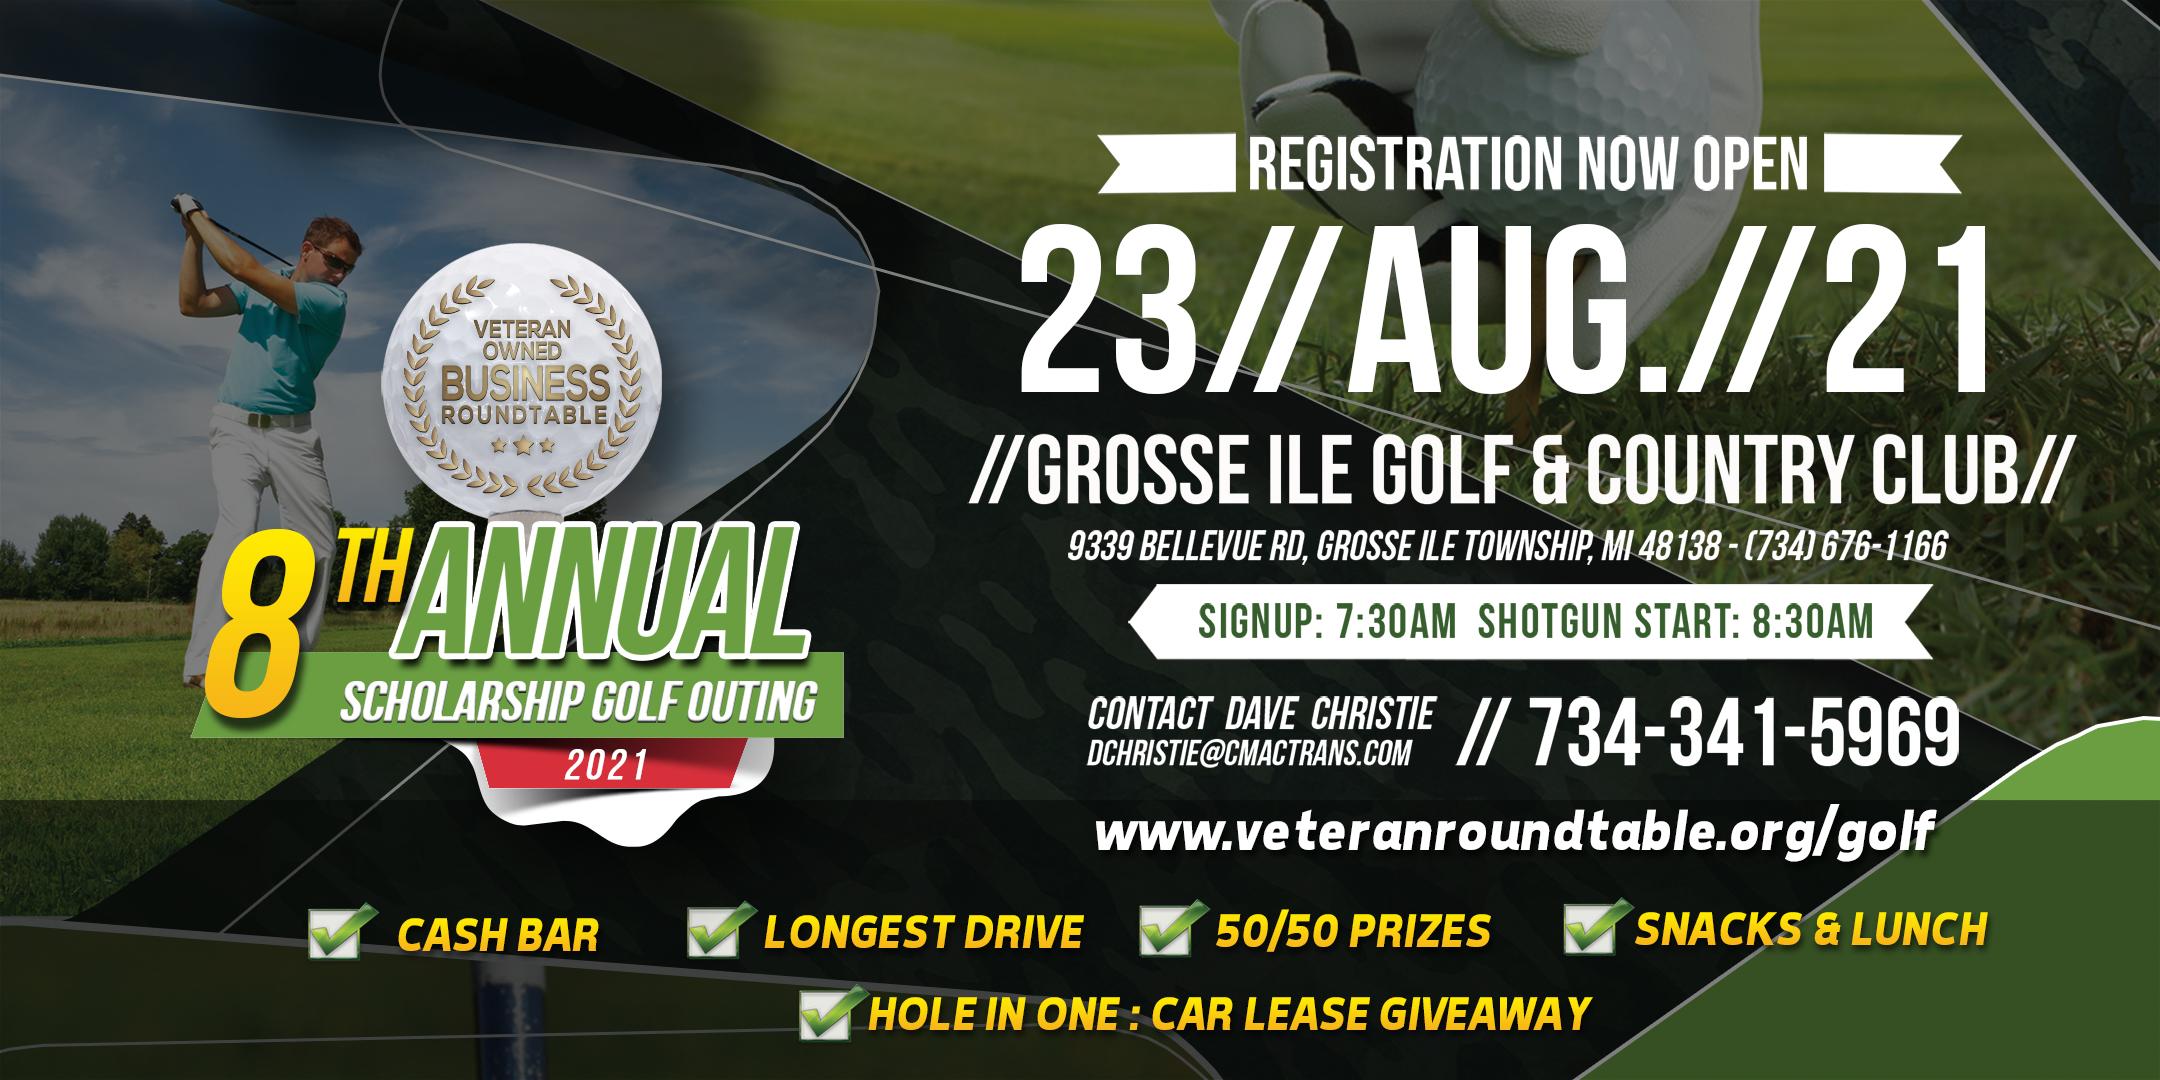 8th Annual Veteran Owned Business Roundtable Scholarship Golf Outing 2021